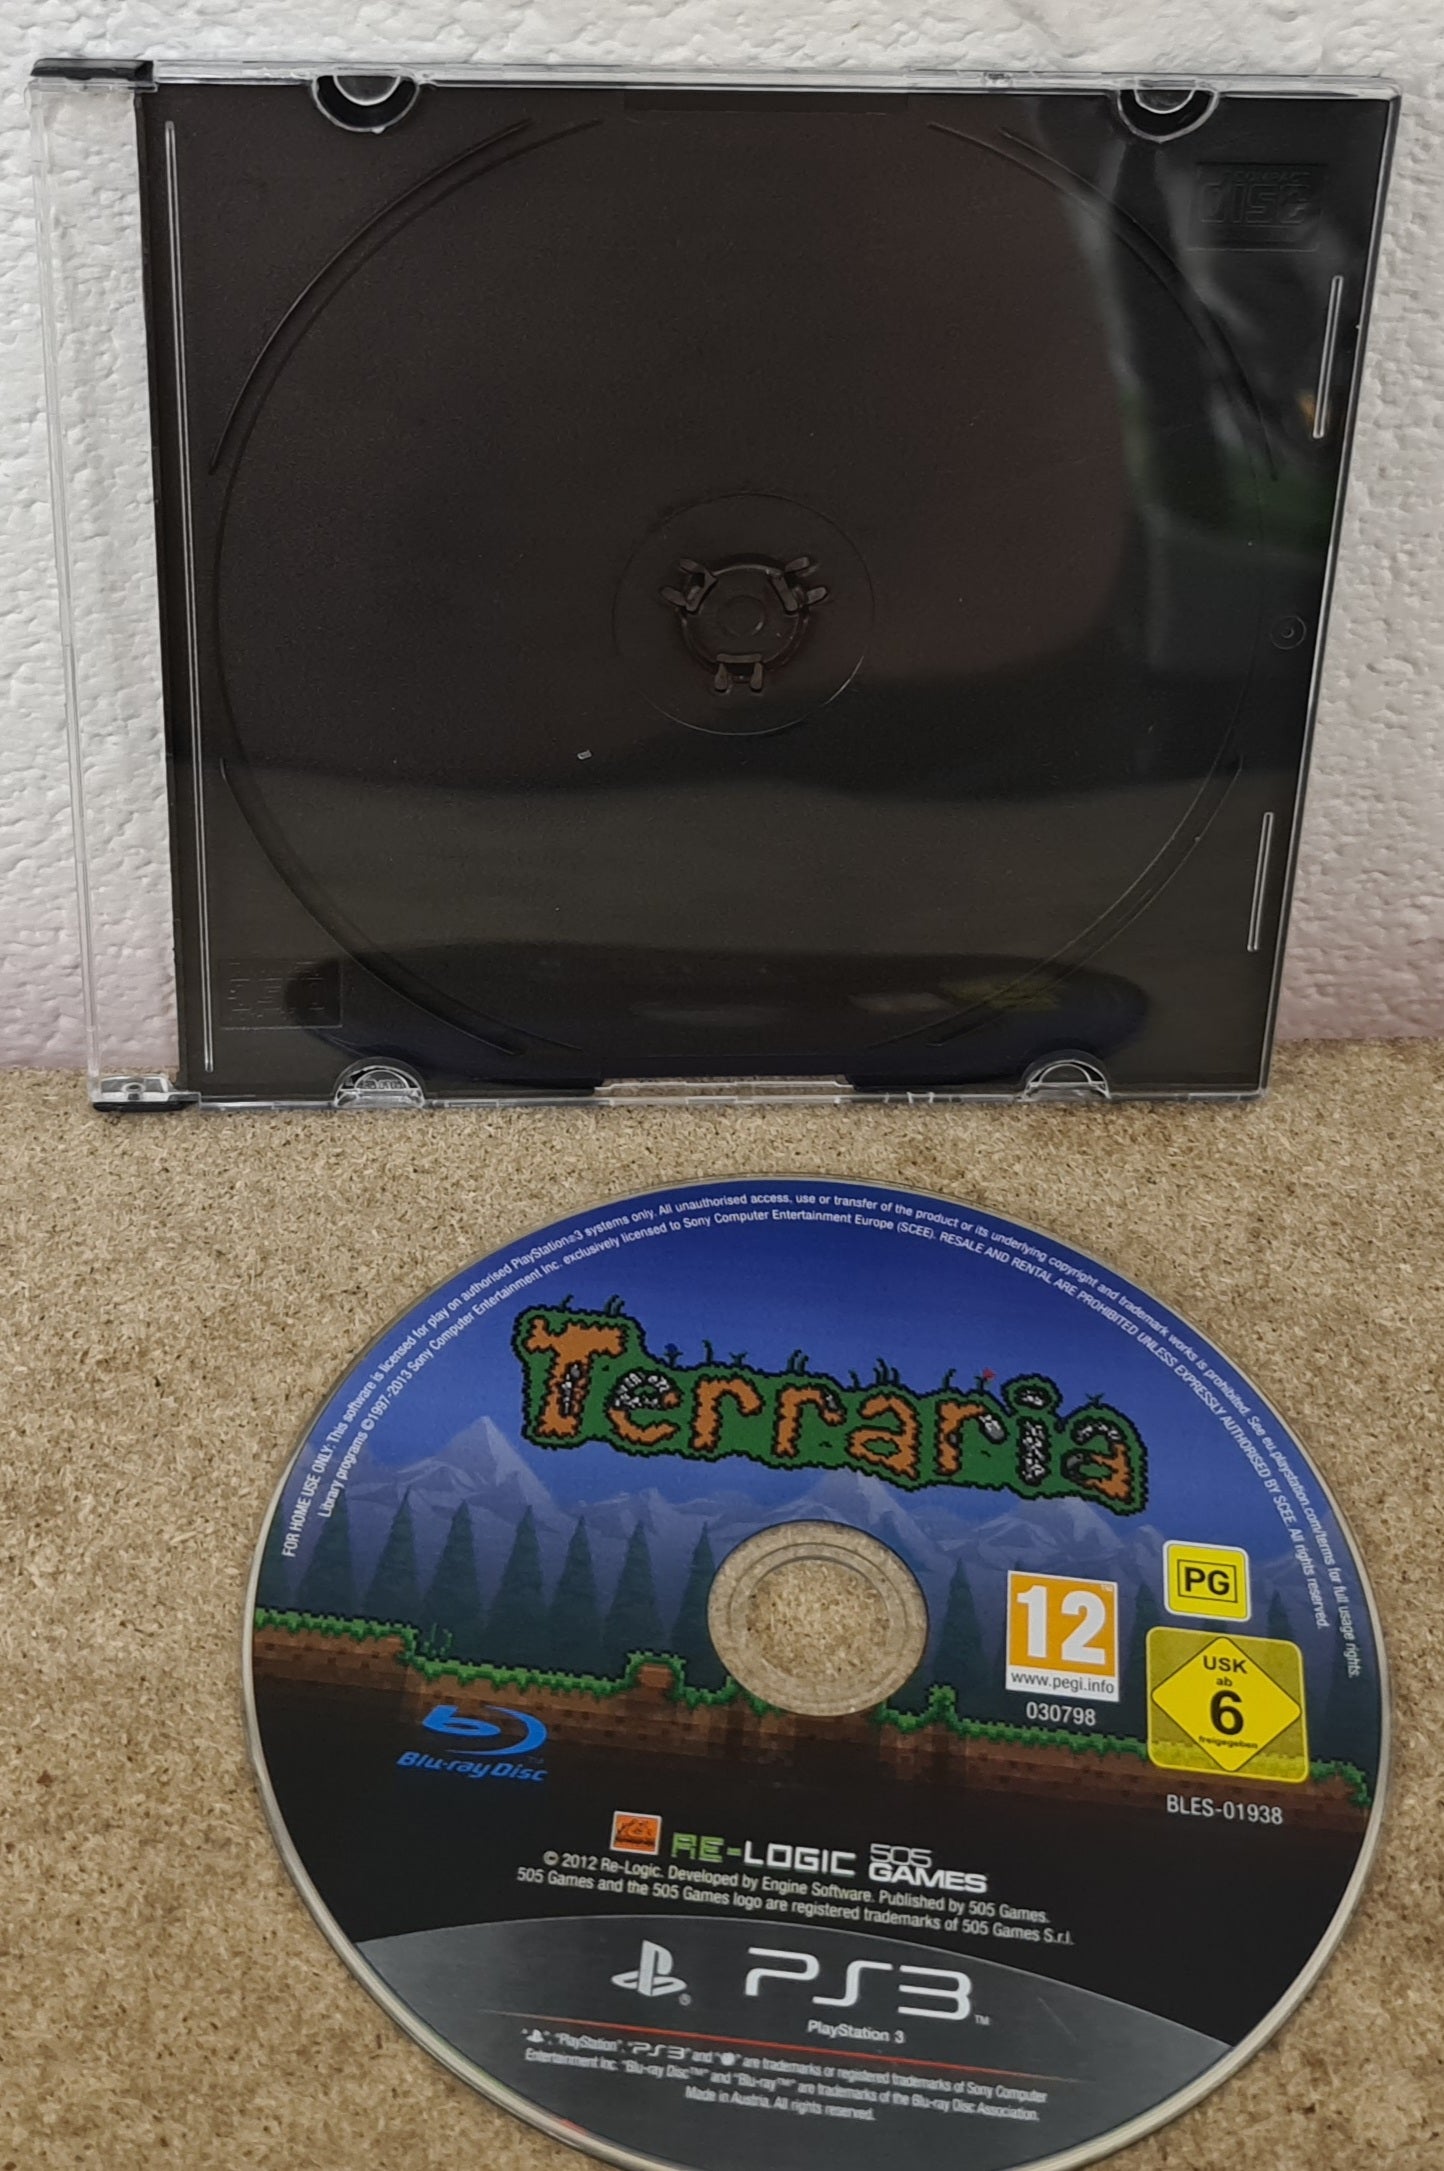 Terraria Sony Playstation 3 (PS3) Game Disc Only